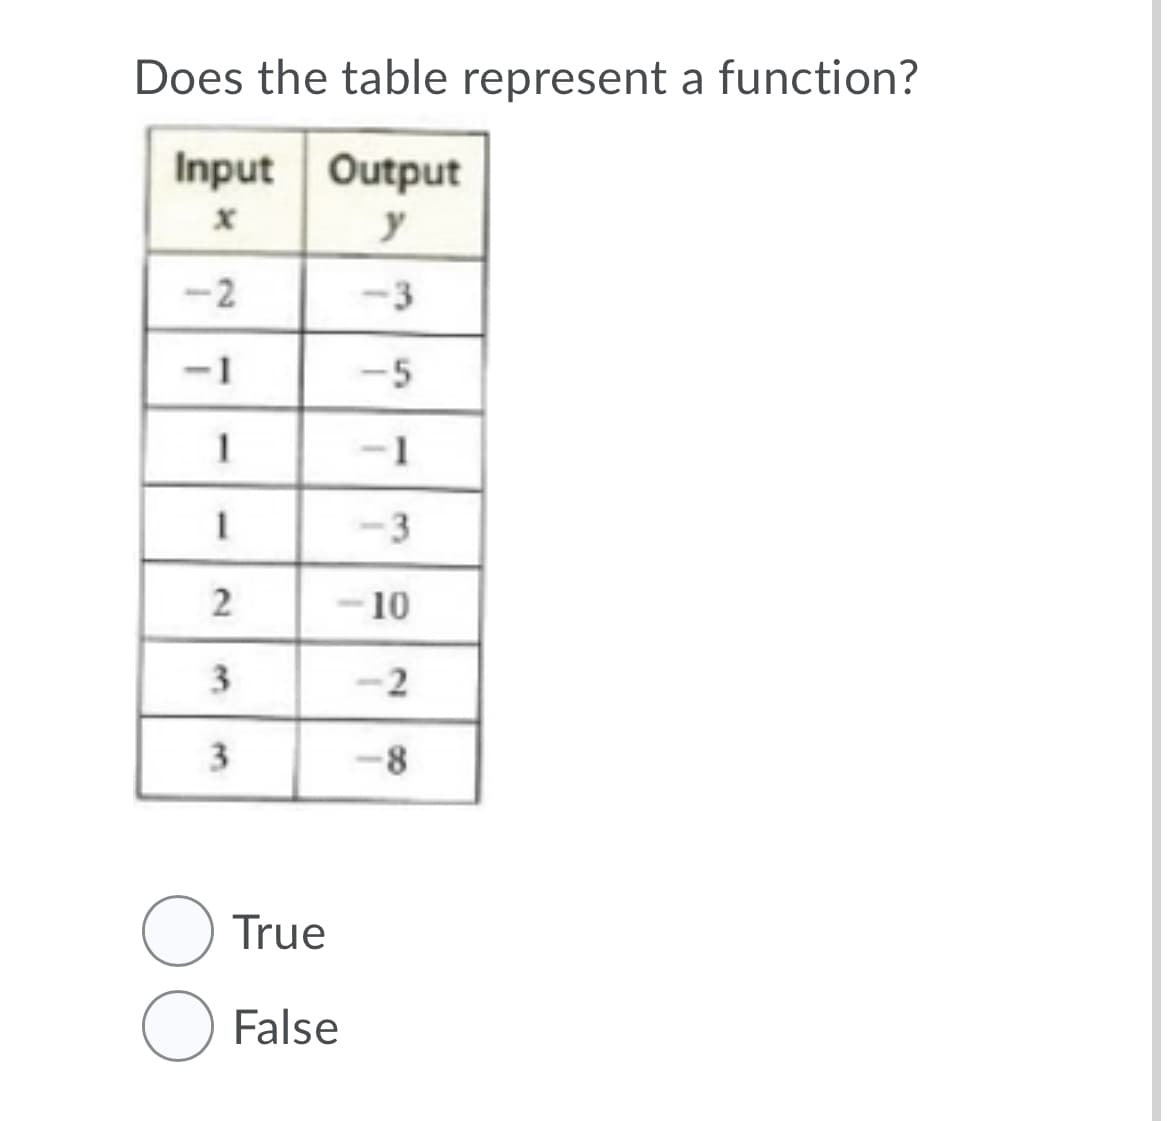 Does the table represent a function?
Input Output
y
-2
-3
-1
-5
-1
-3
10
3
-2
3
8.
True
False
2)
